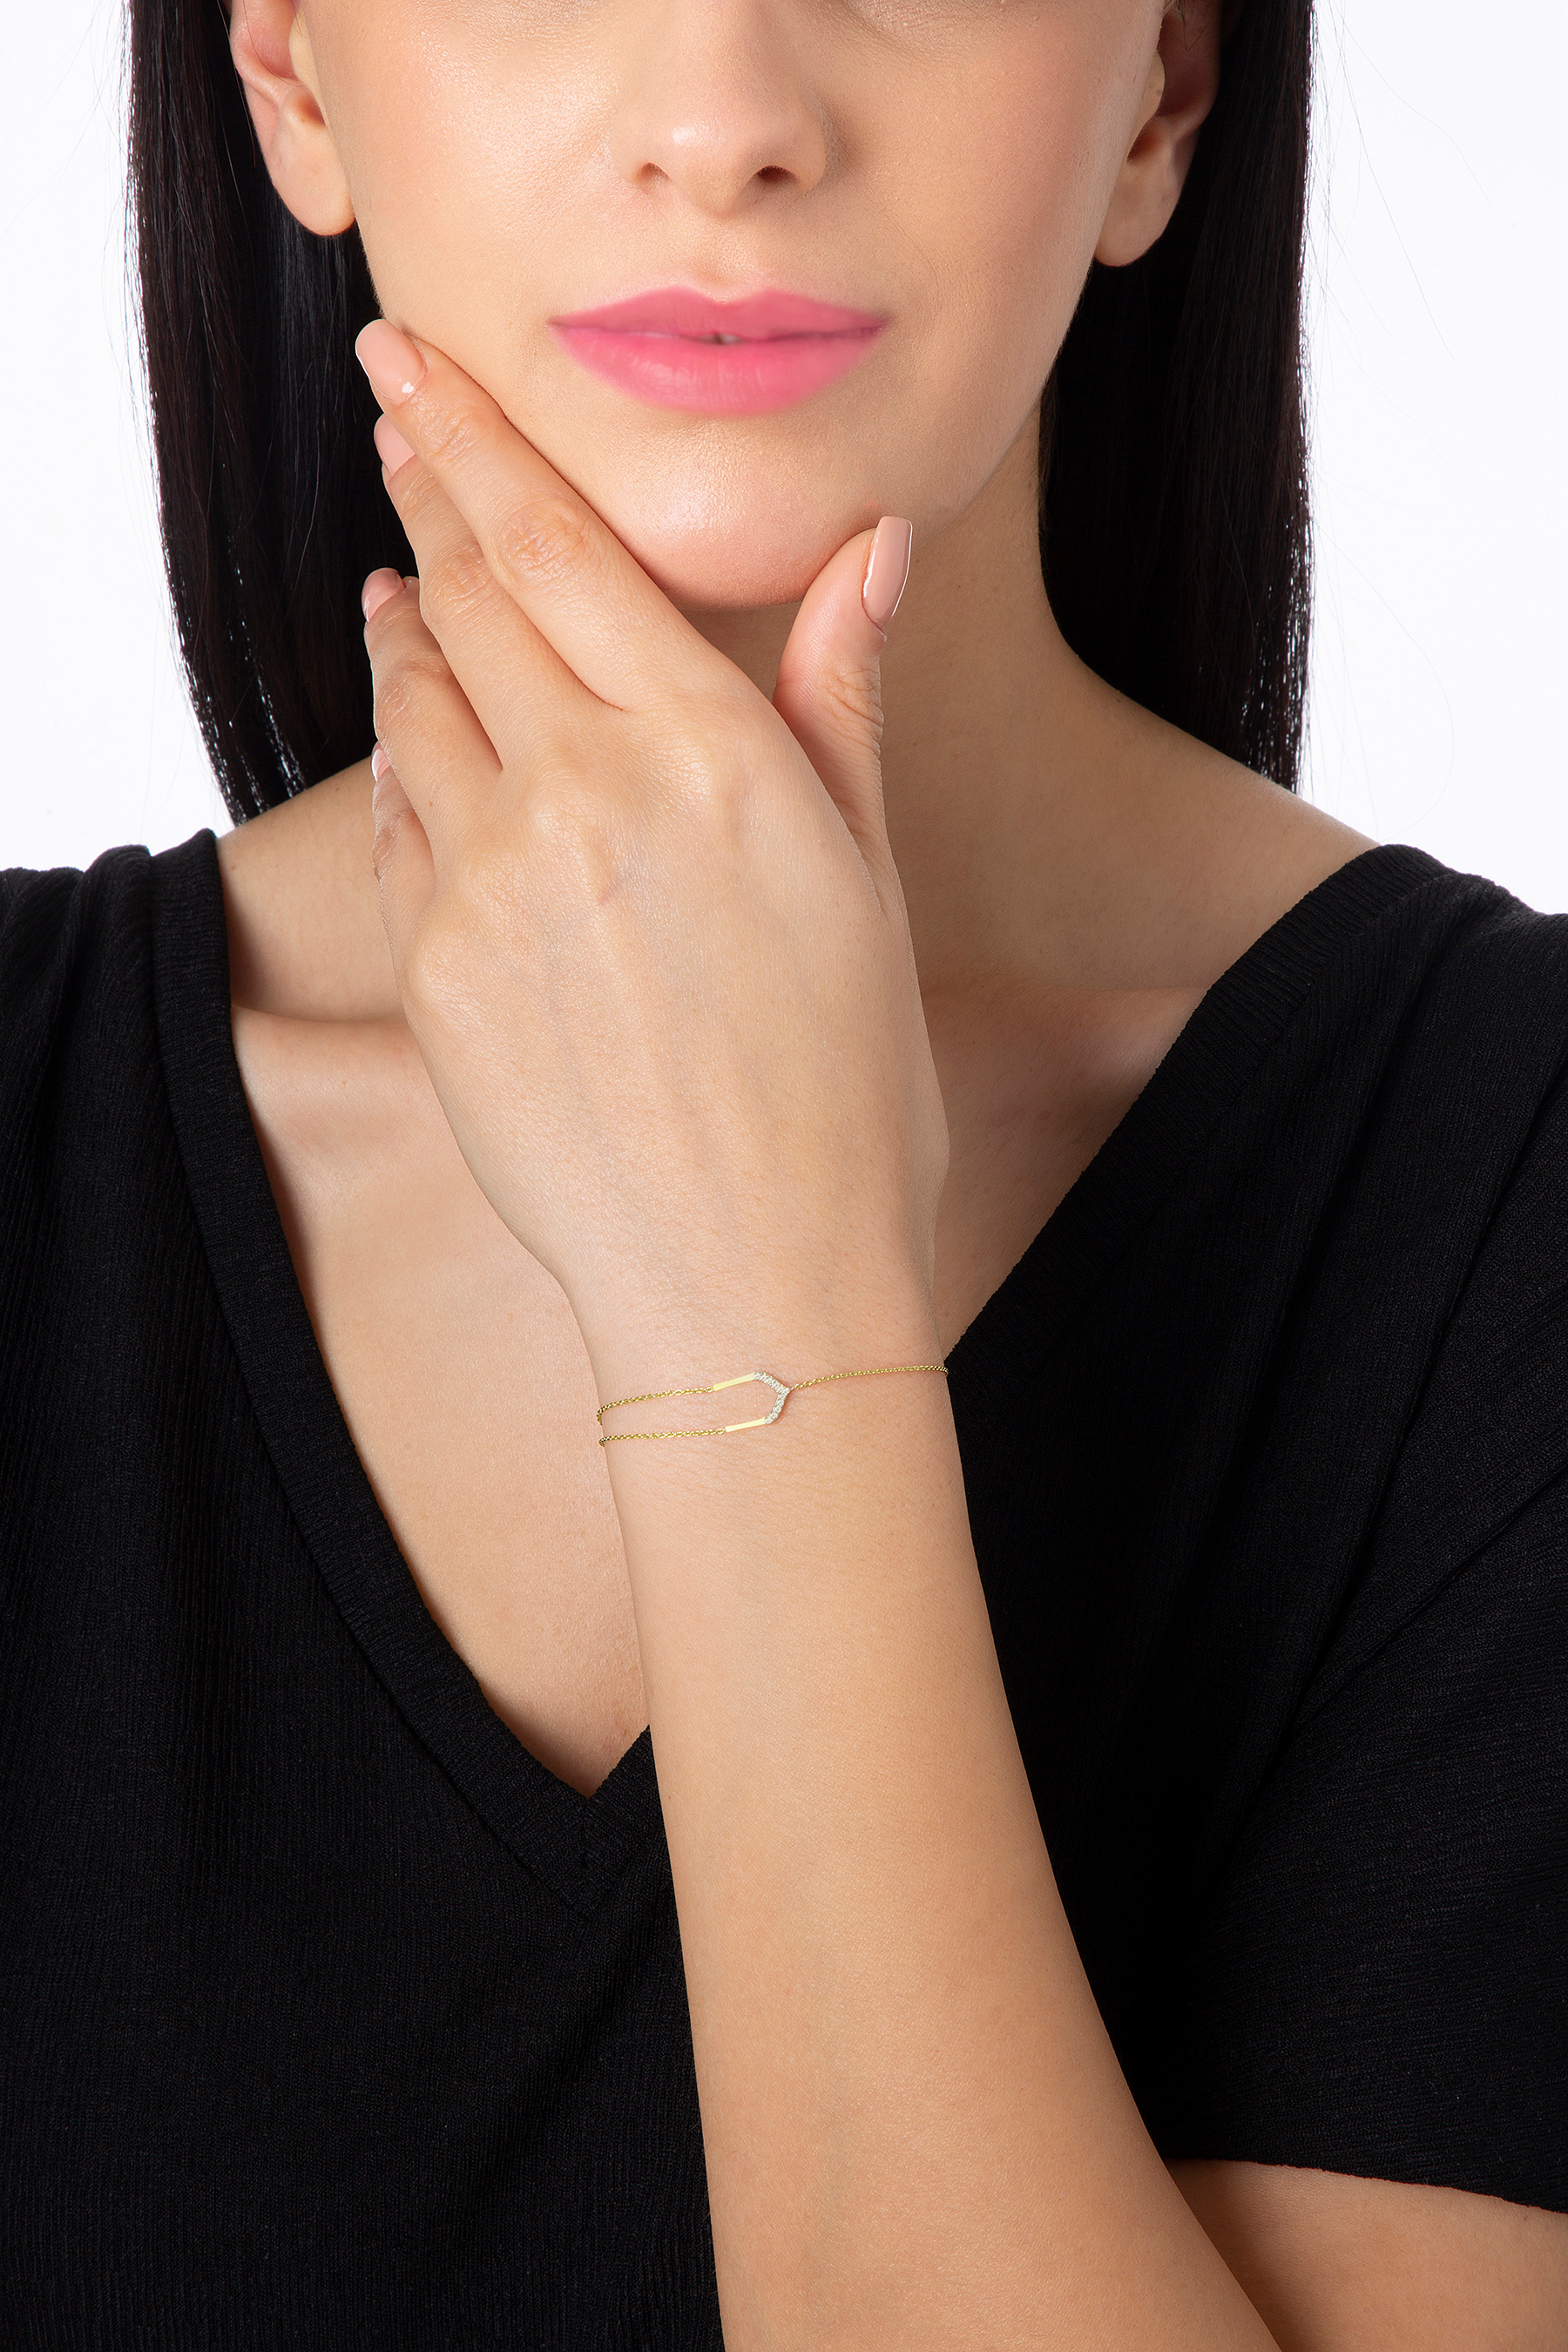 Four Centered Arch Bracelet in Yellow Gold - Her Story Shop